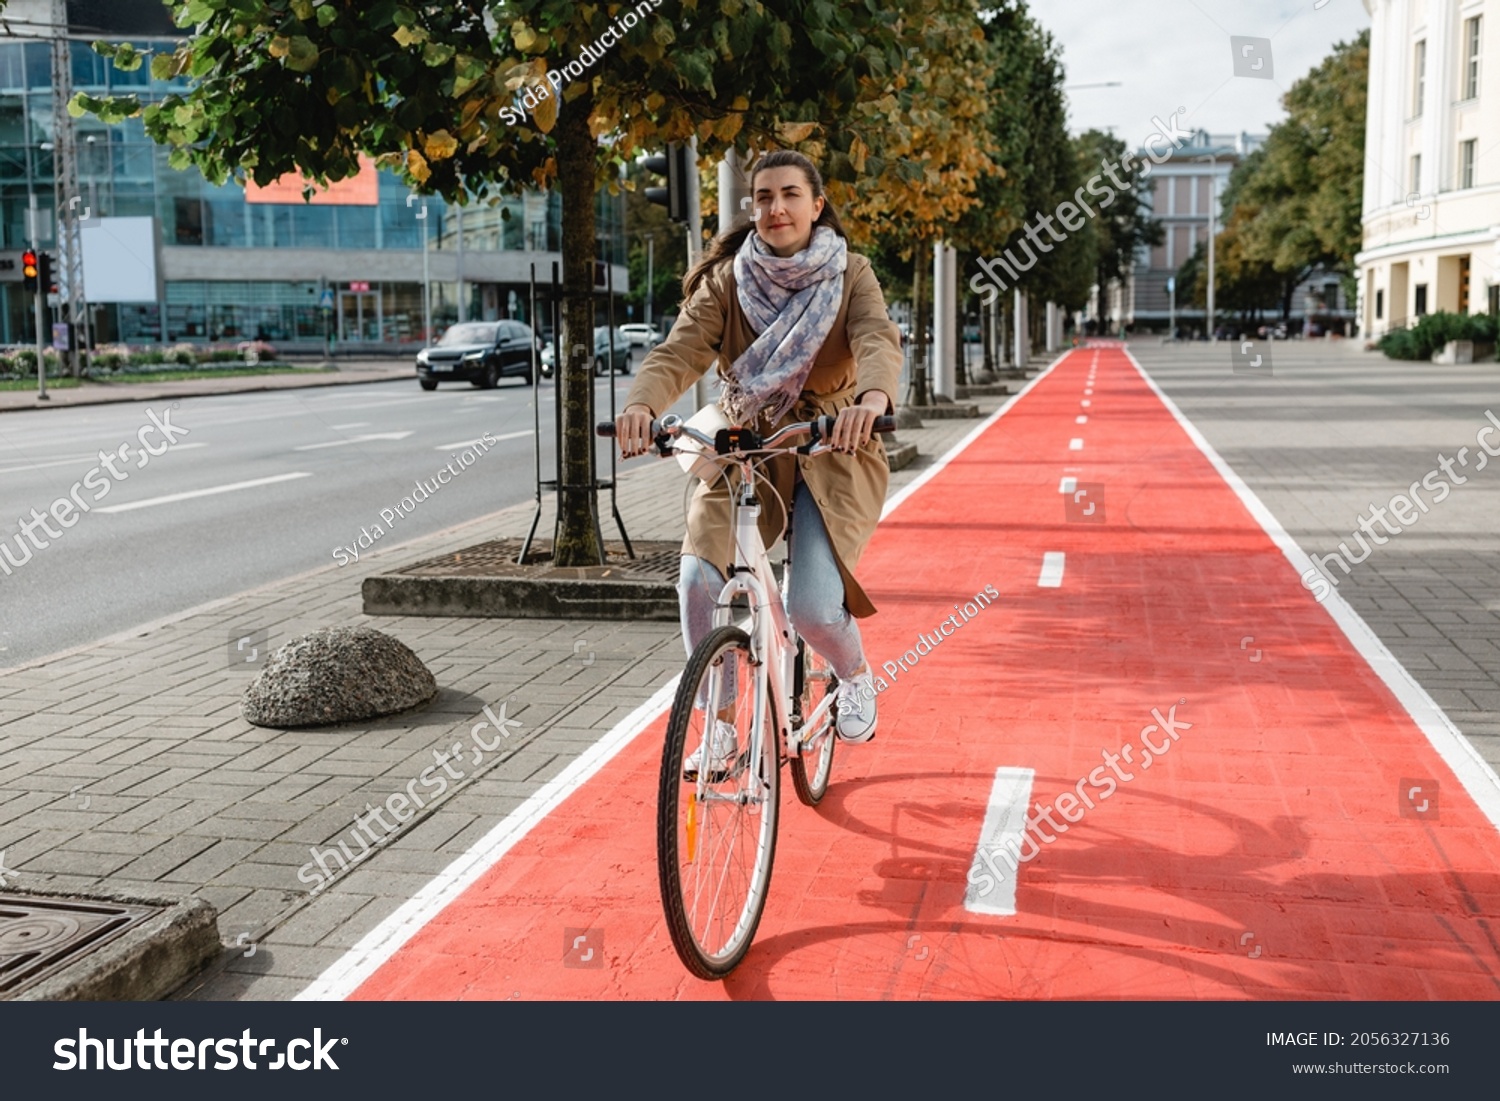 traffic, city transport and people concept - woman riding bicycle along red bike lane or two way road on street #2056327136